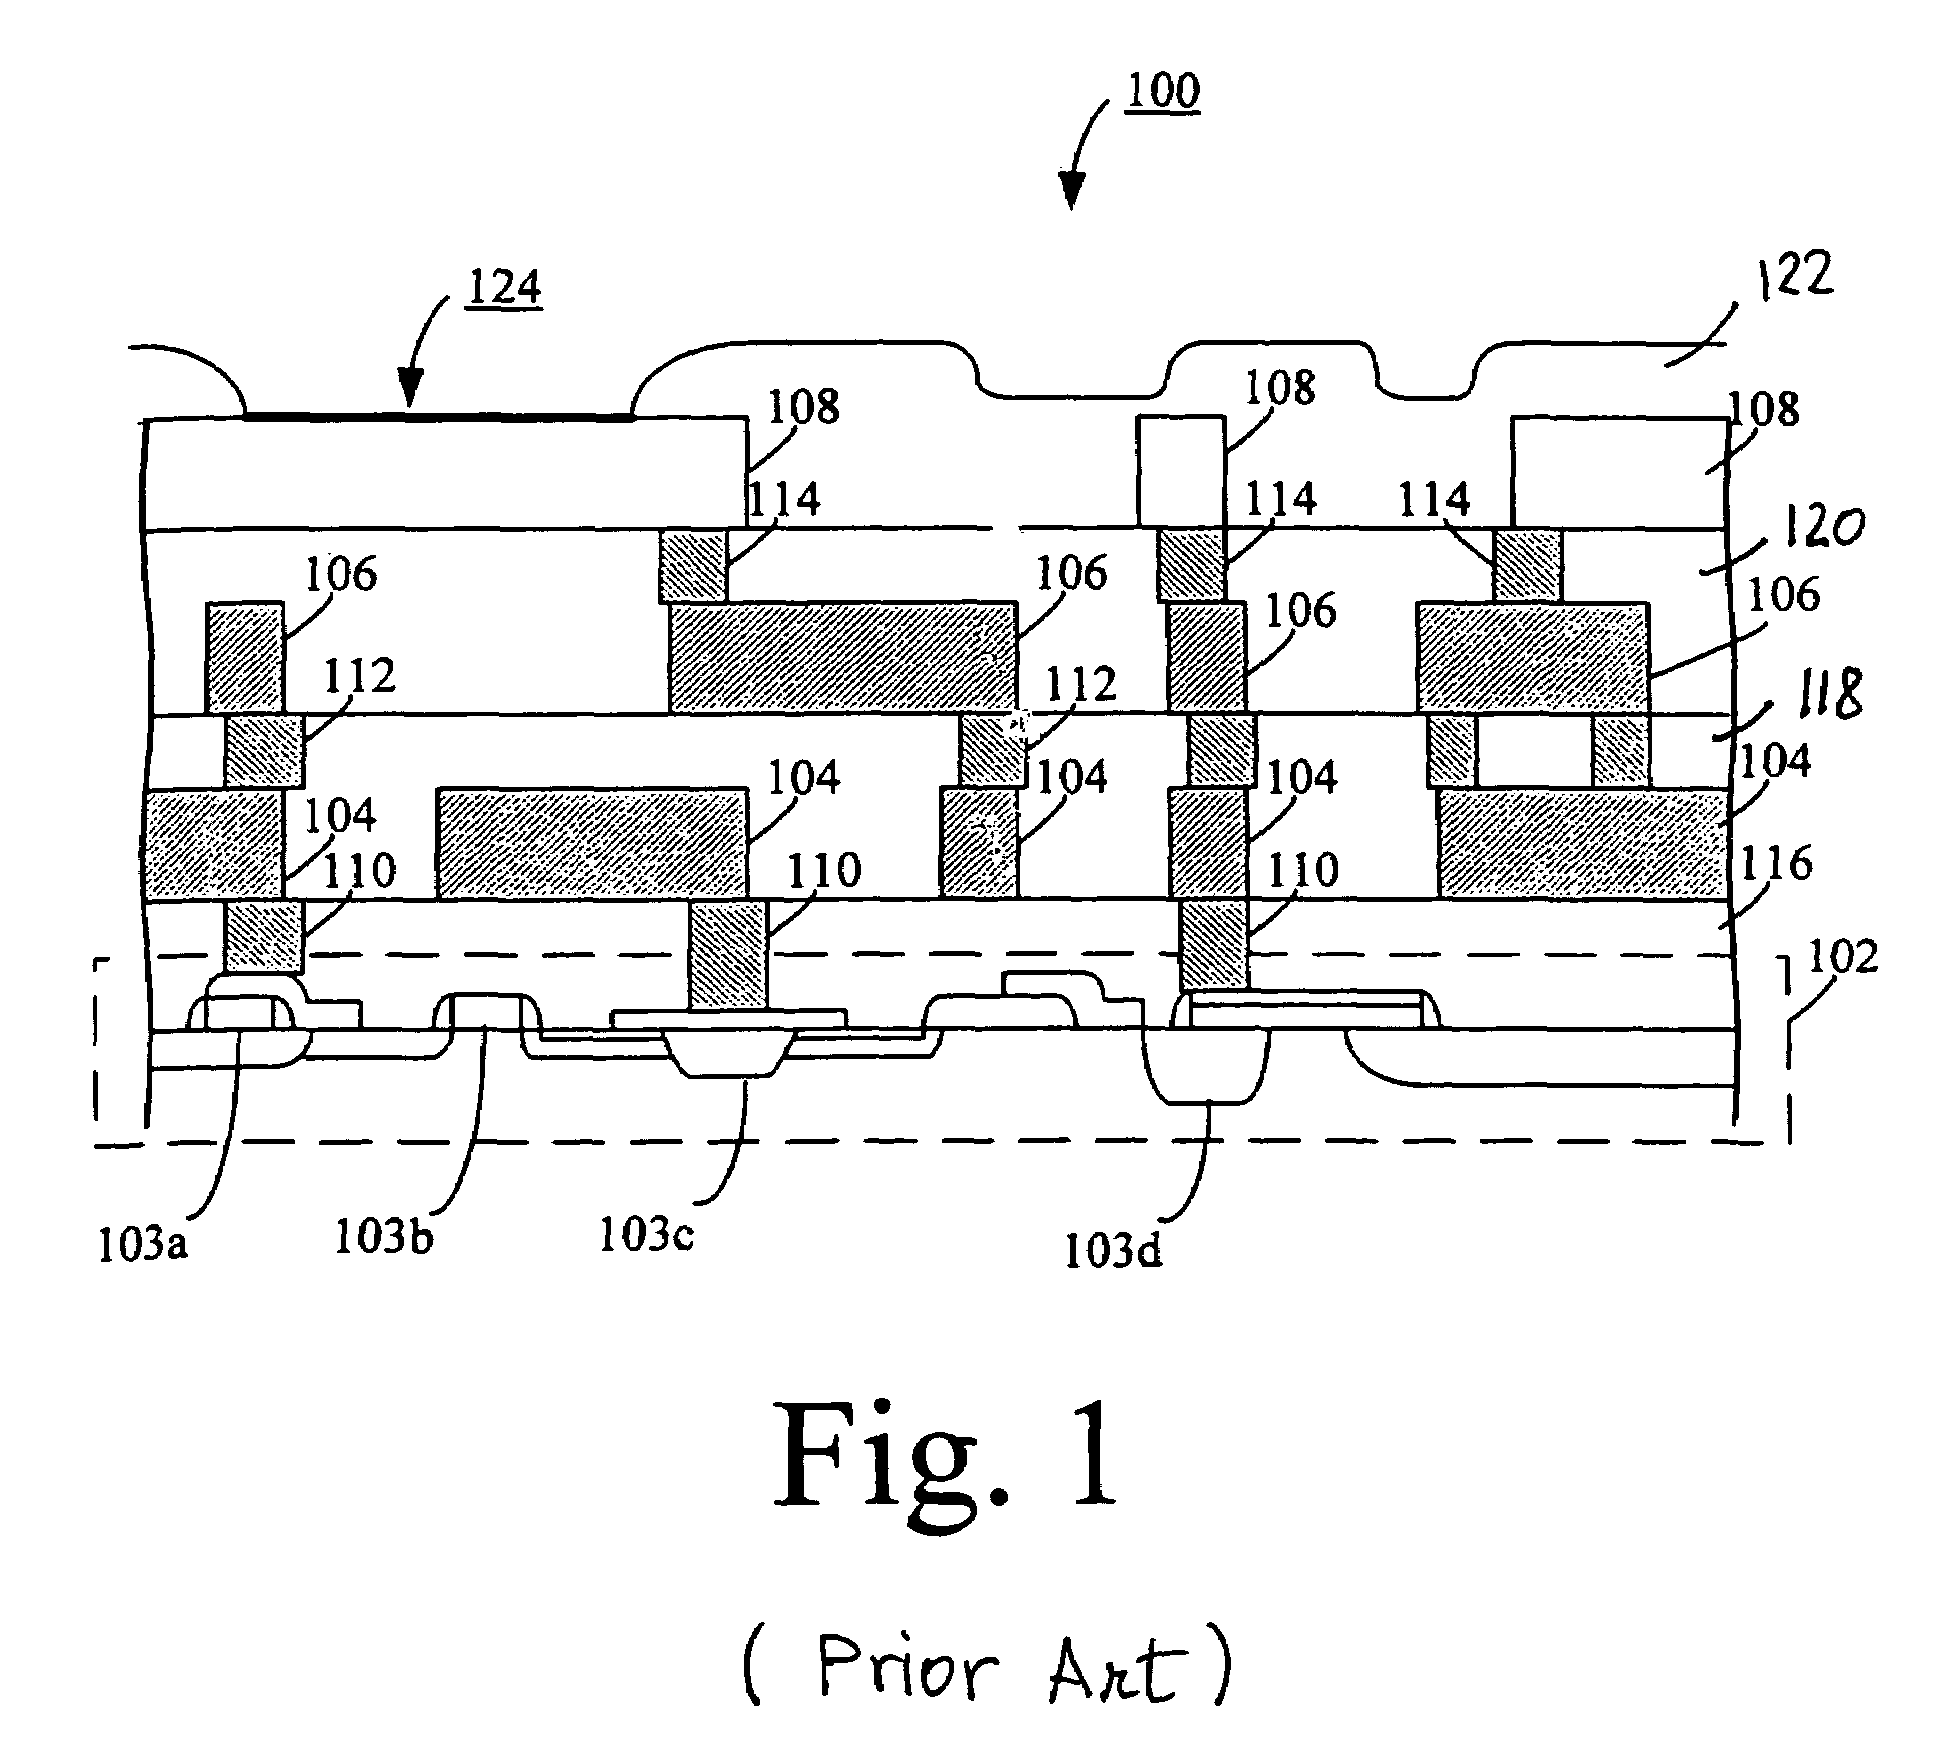 External power ring with multiple tapings to reduce IR drop in integrated circuit